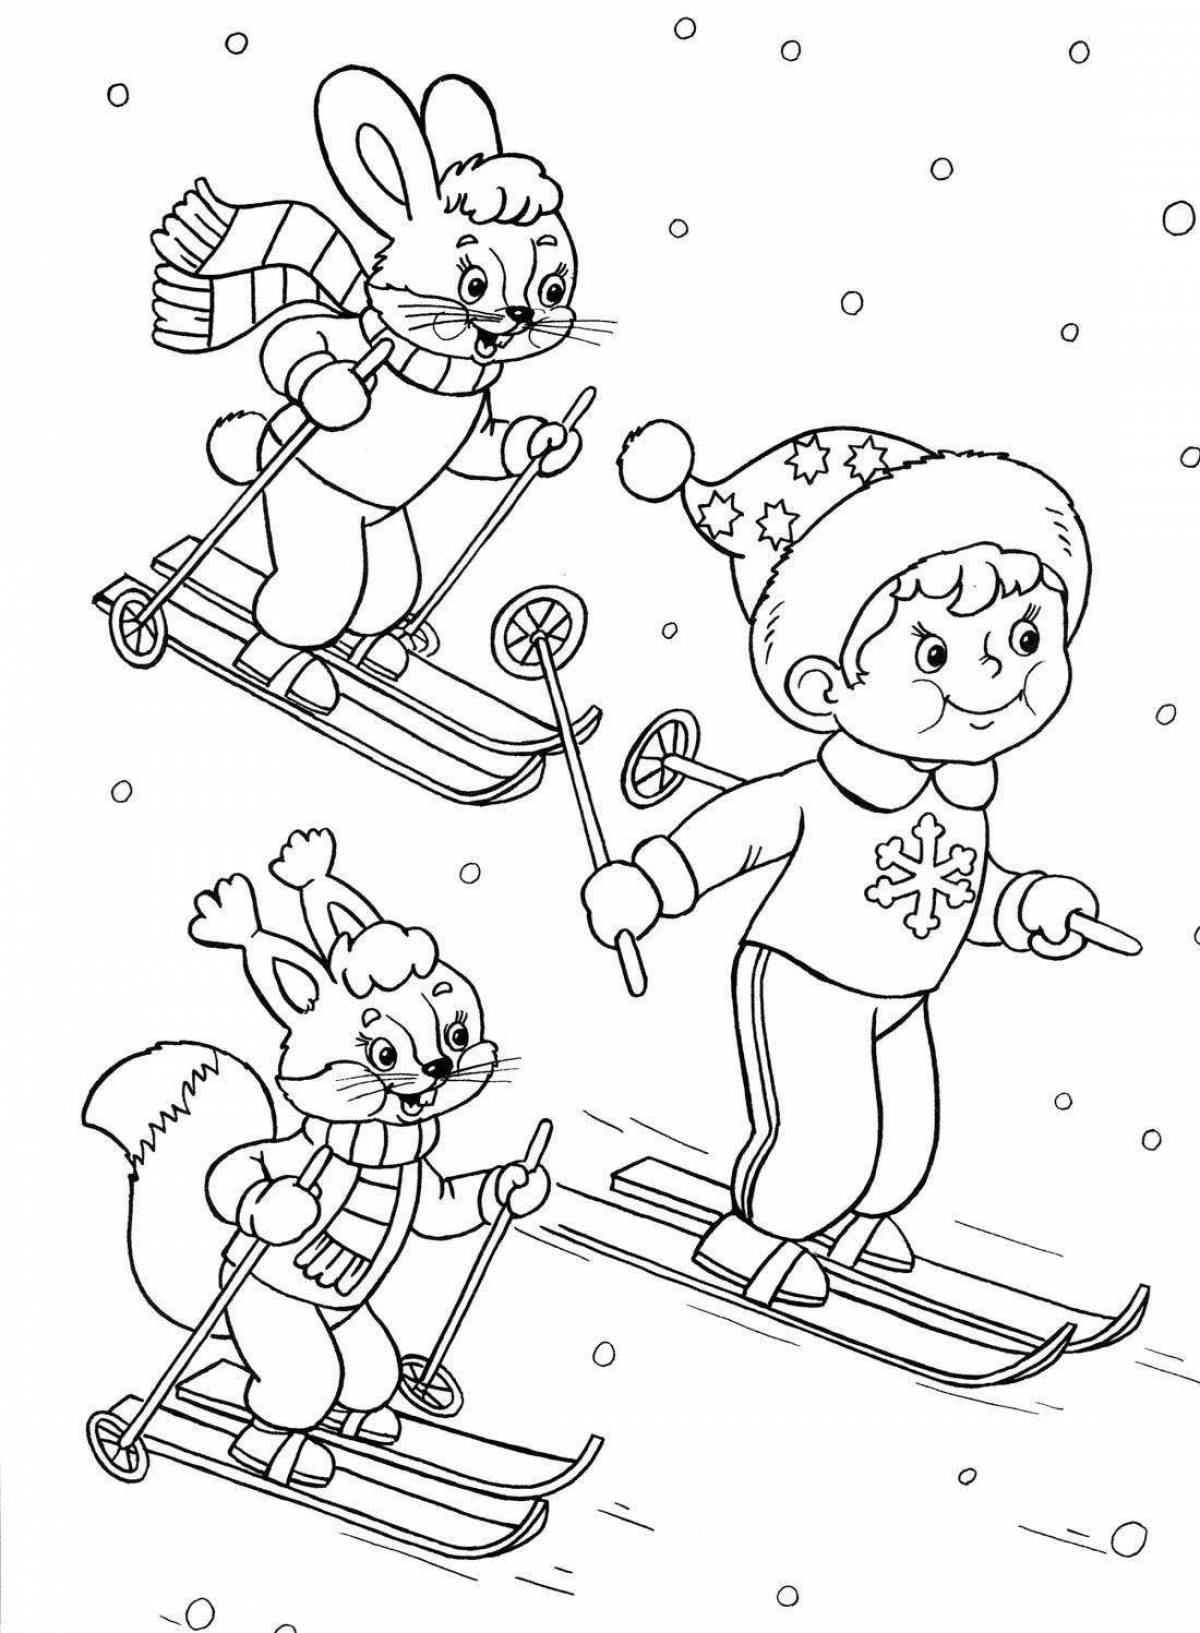 Colorful picture with winter sports for children in kindergarten